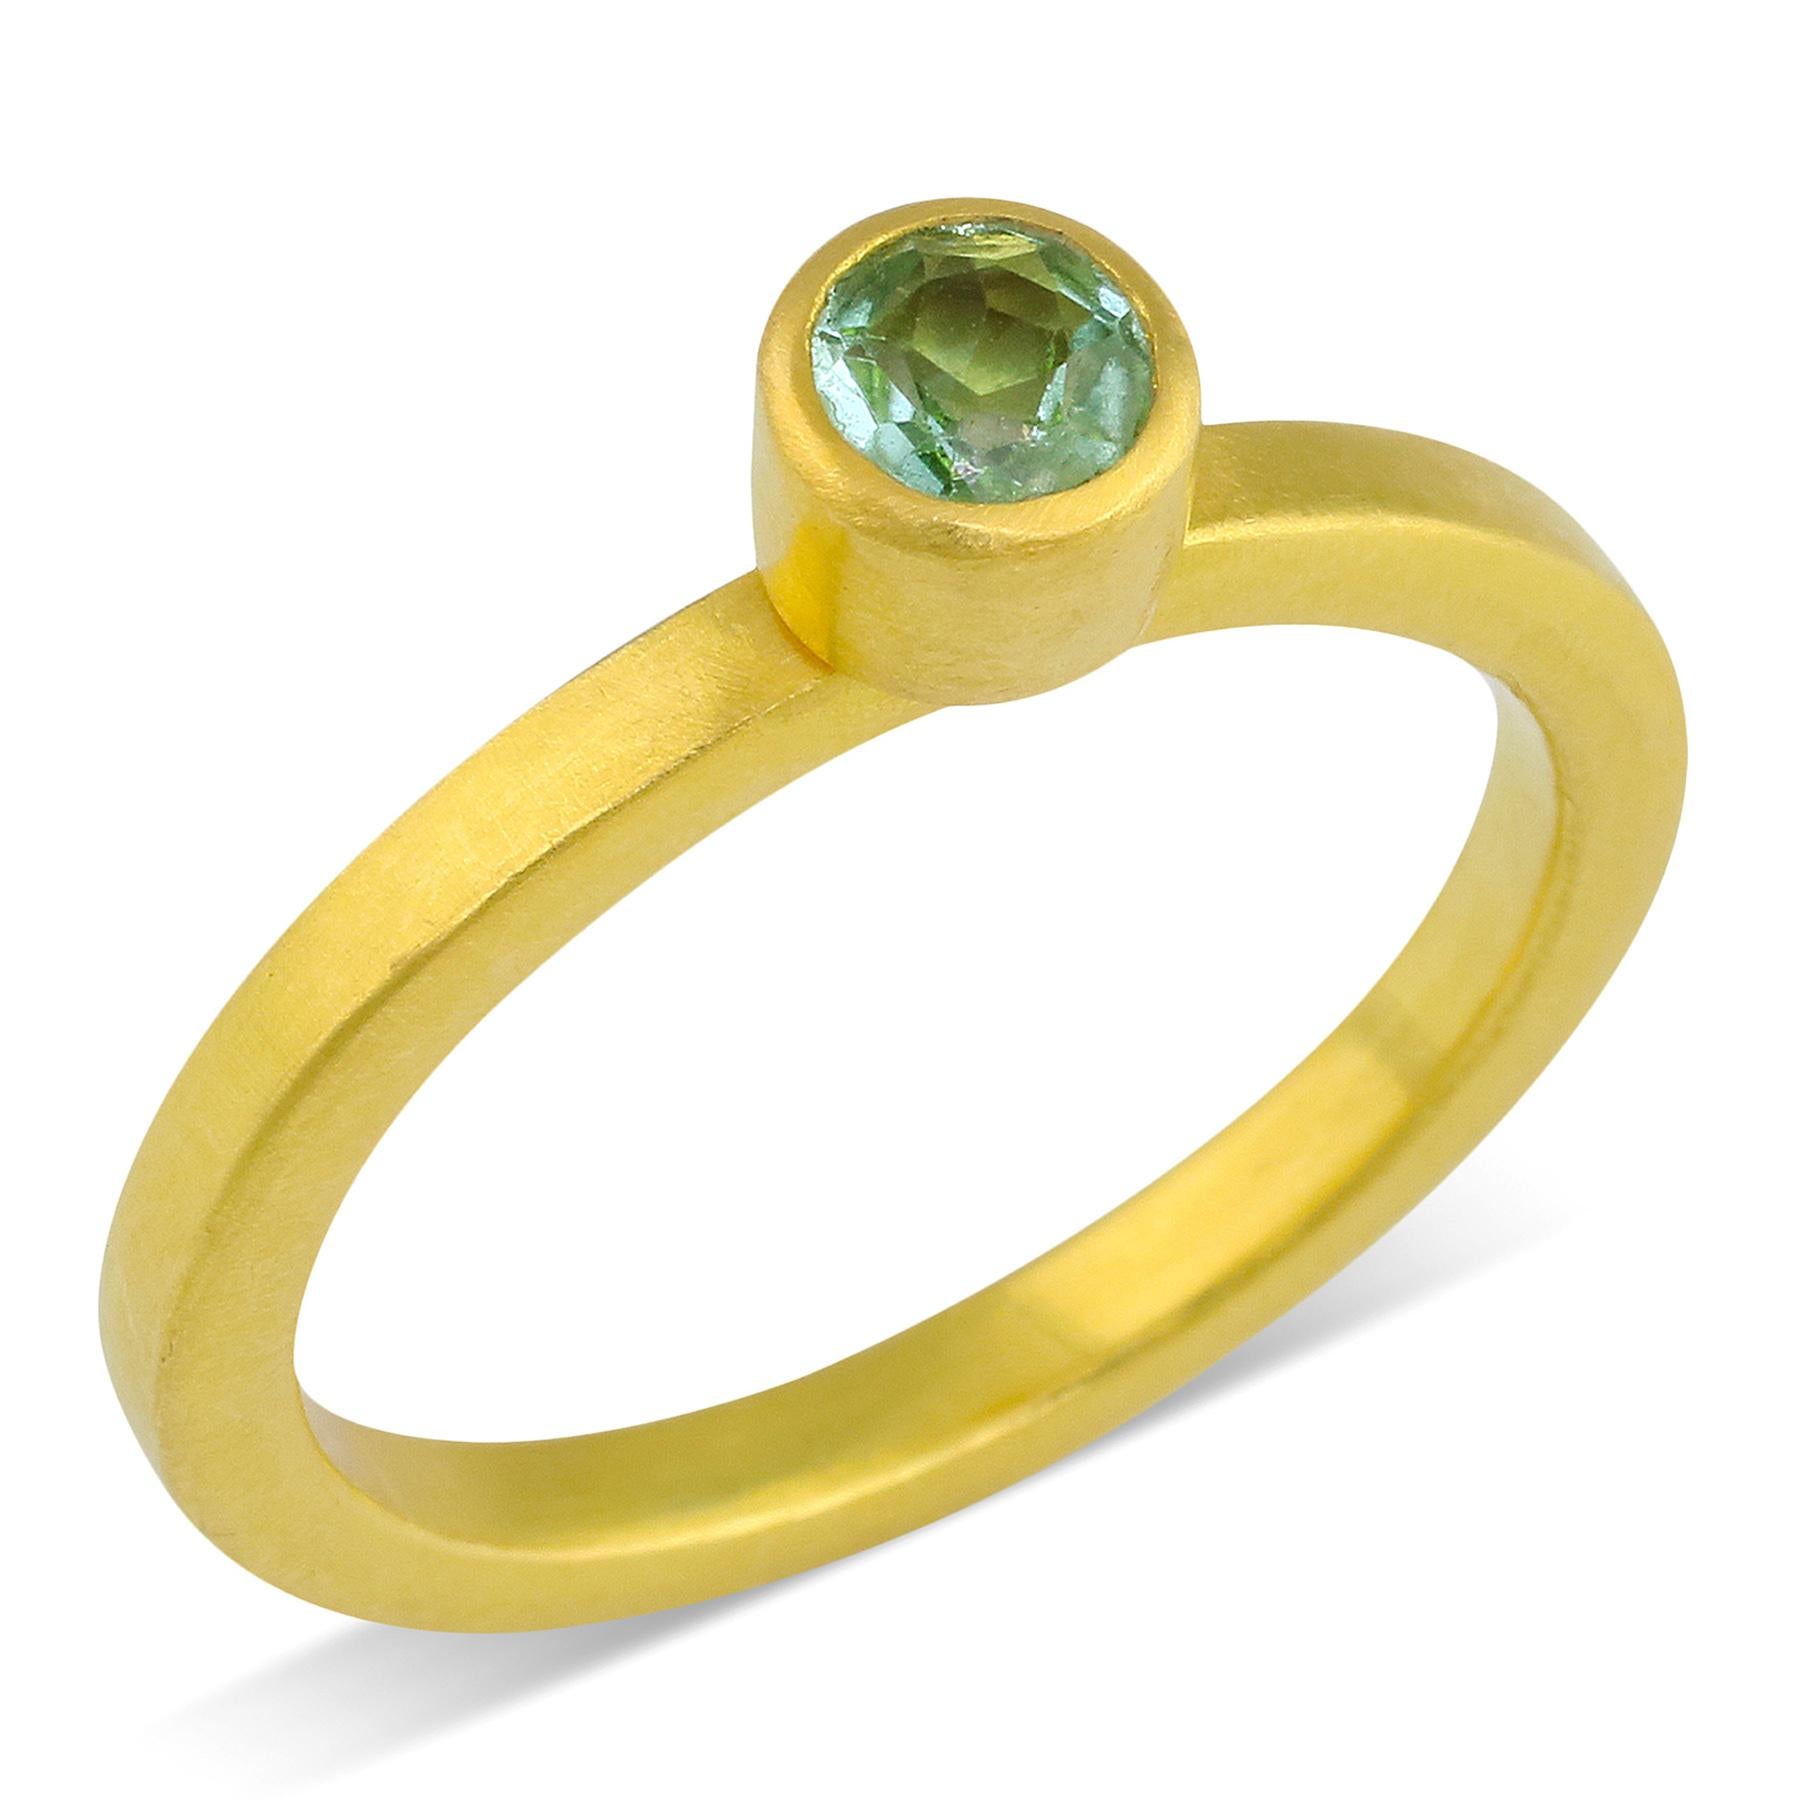 PHILIPPE-SPENCER -   .30 Ct. Faceted Teal Tourmaline wrapped in 22K Gold Bezel Setting, with Anvil-Forged Solid 20K Gold 2.25mm x 2mm Band. Heavy Brushed Exterior, Mirror Polish Interior.  Size 6 3/4, and is in-stock and ready to ship. Our apologies